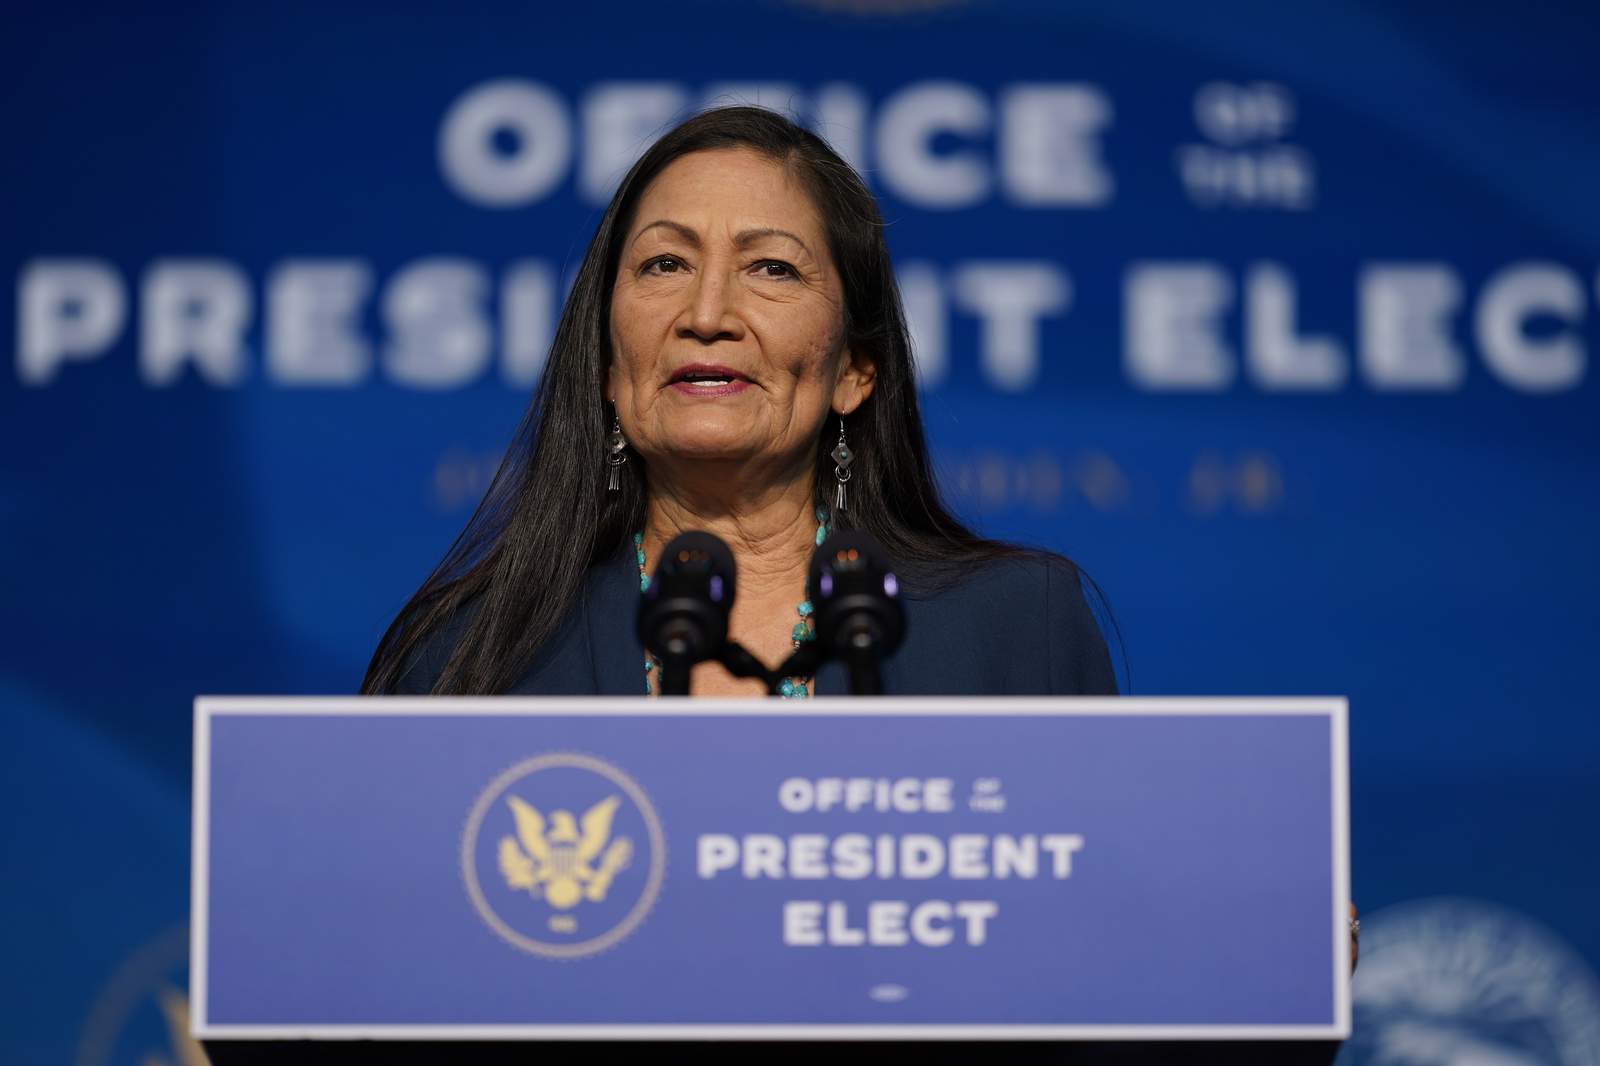 Tribes have high hopes as Haaland confirmation hearing nears